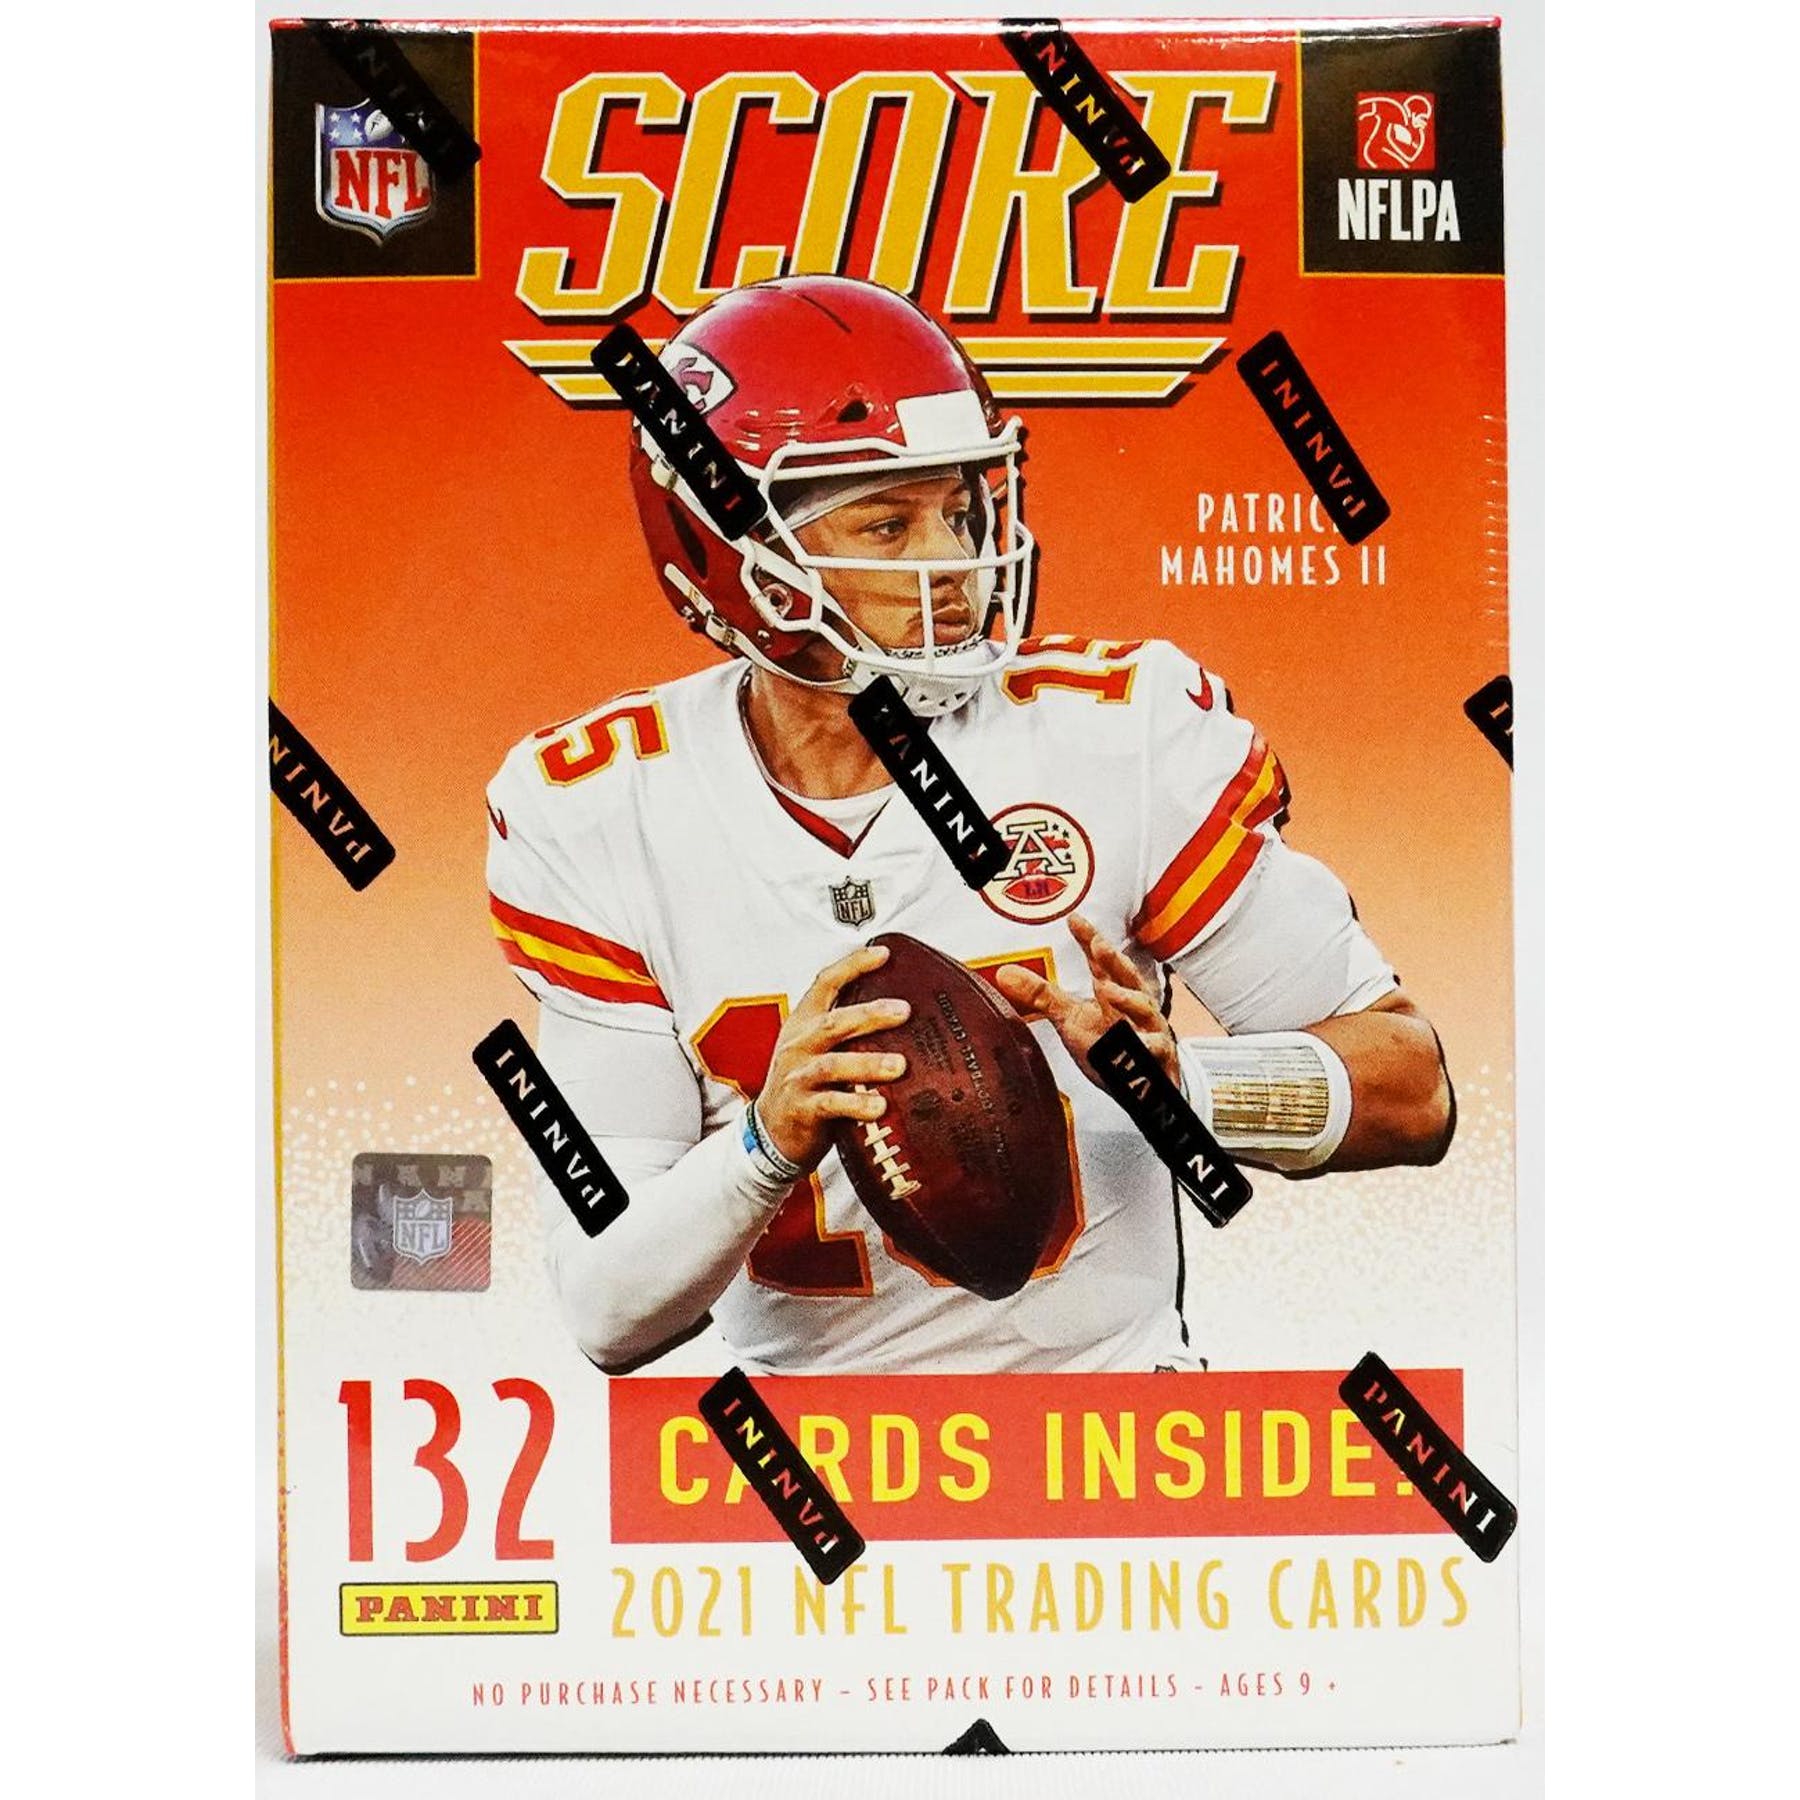 2021 Panini Score Football Sealed Blaster 132 Card Box Look for autograph and memorabilia Trevor Lawrence Rookie 